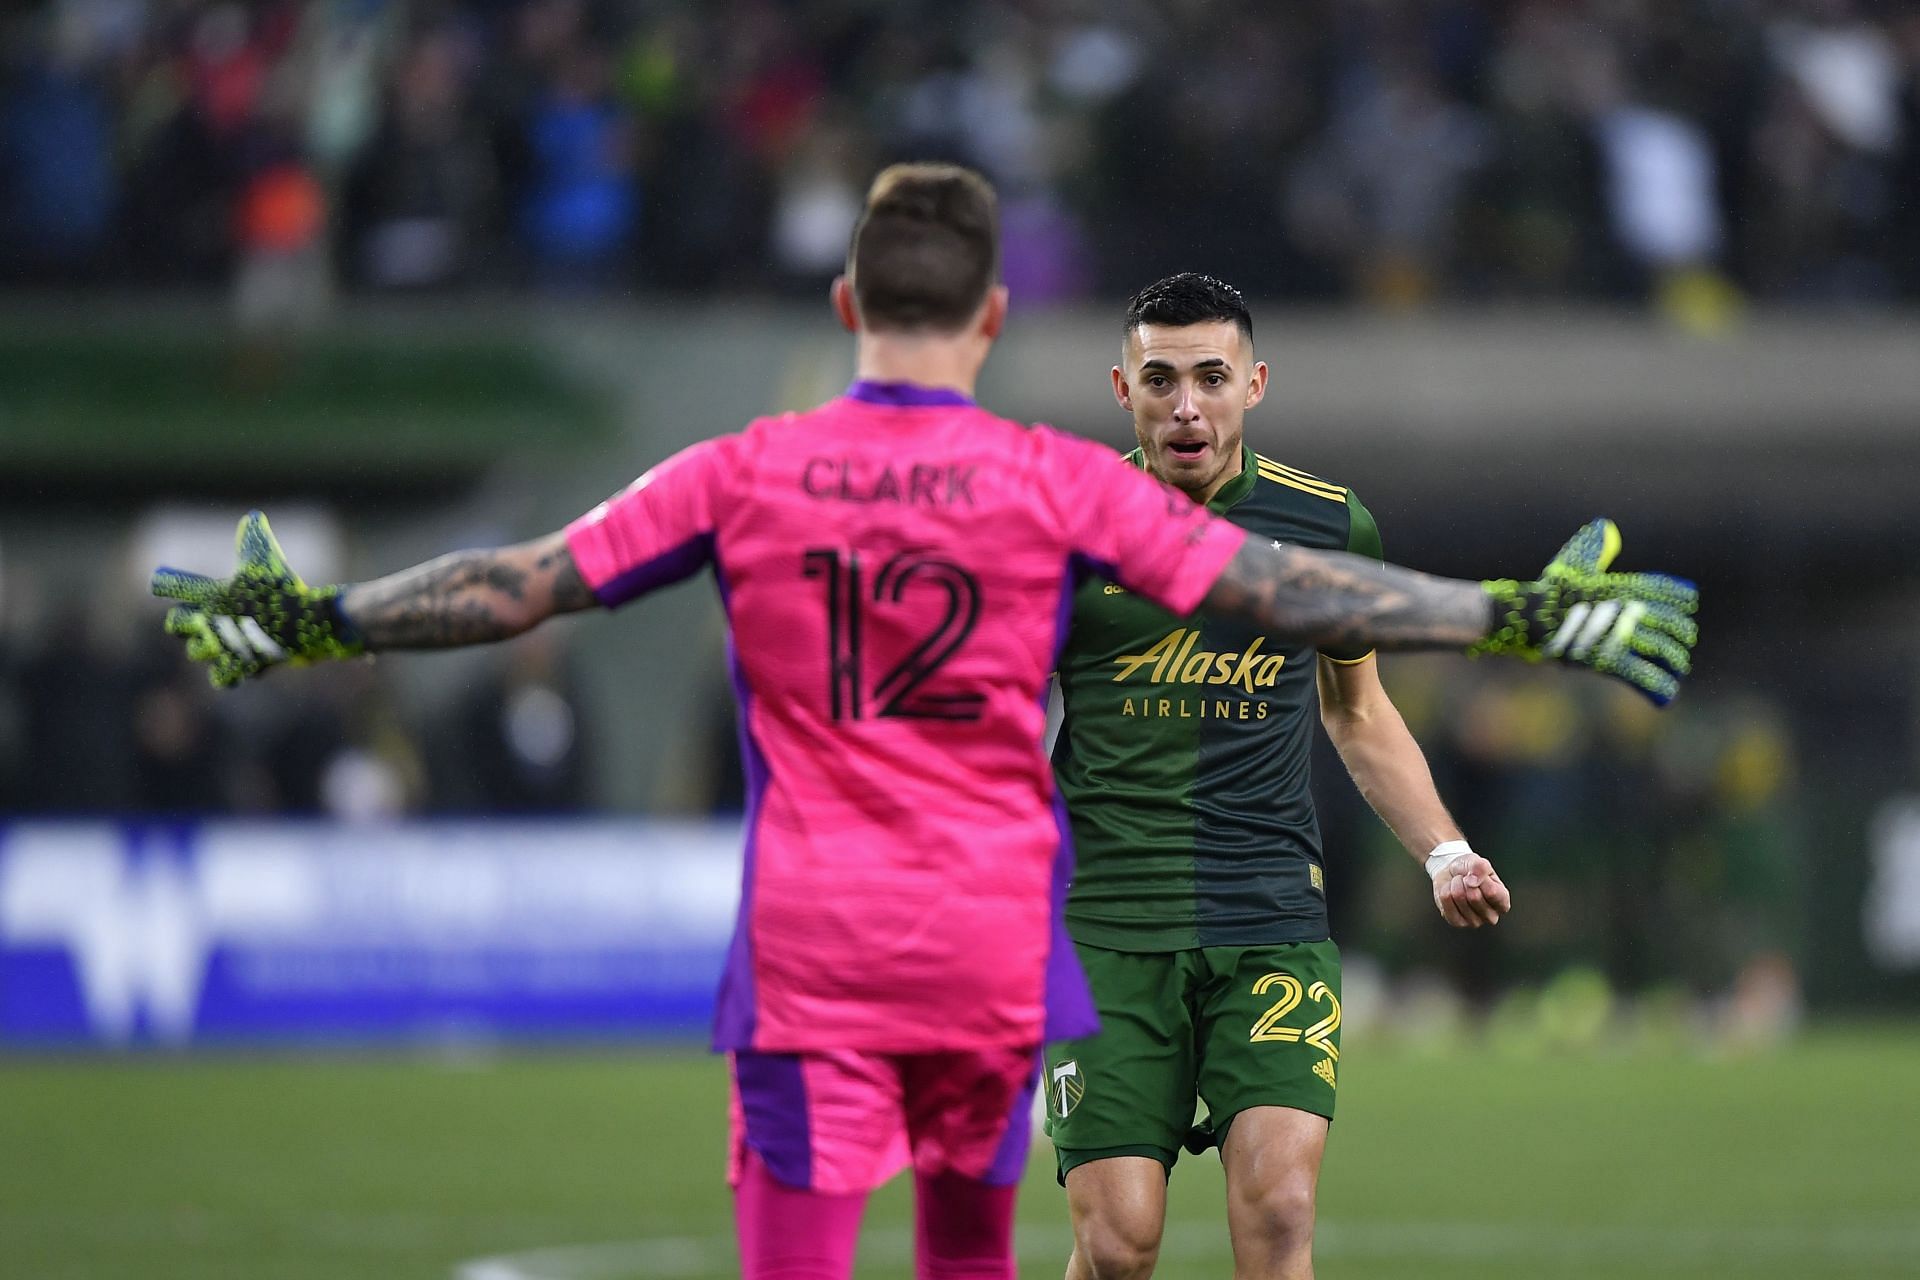 Portland Timbers face Houston Dynamo in the MLS on Saturday